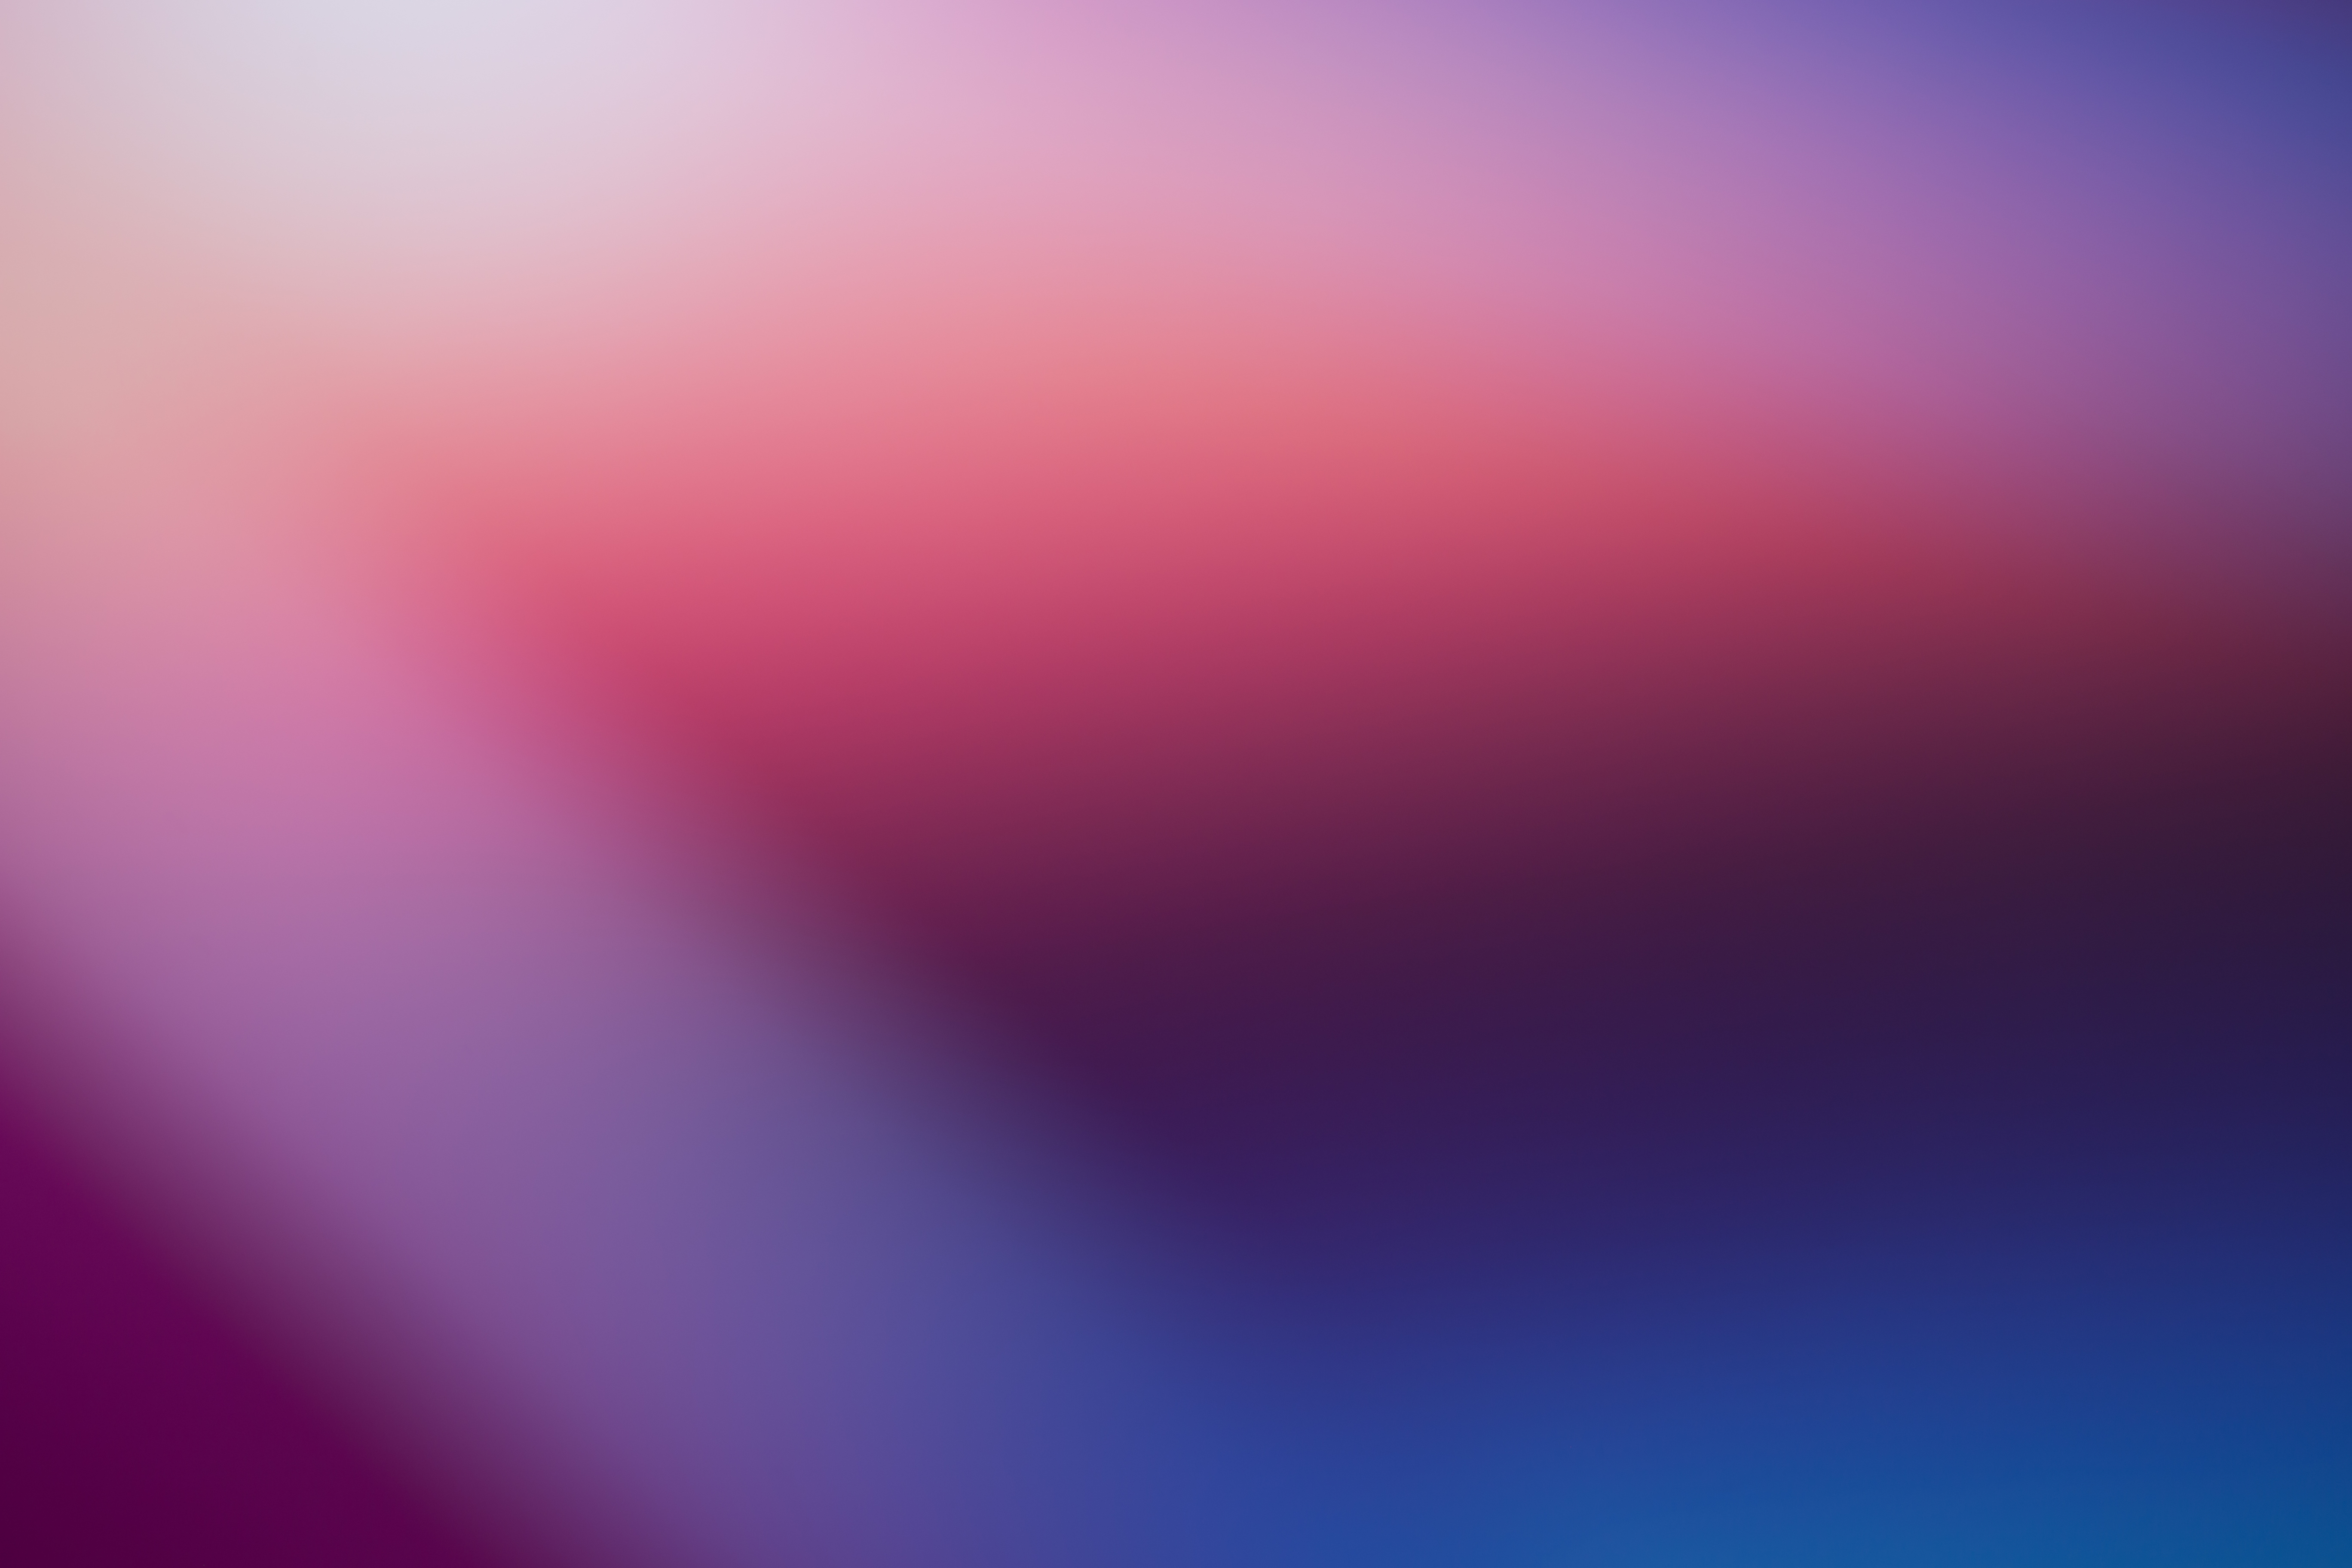 121442 free wallpaper 2160x3840 for phone, download images violet, color, gradient, purple 2160x3840 for mobile